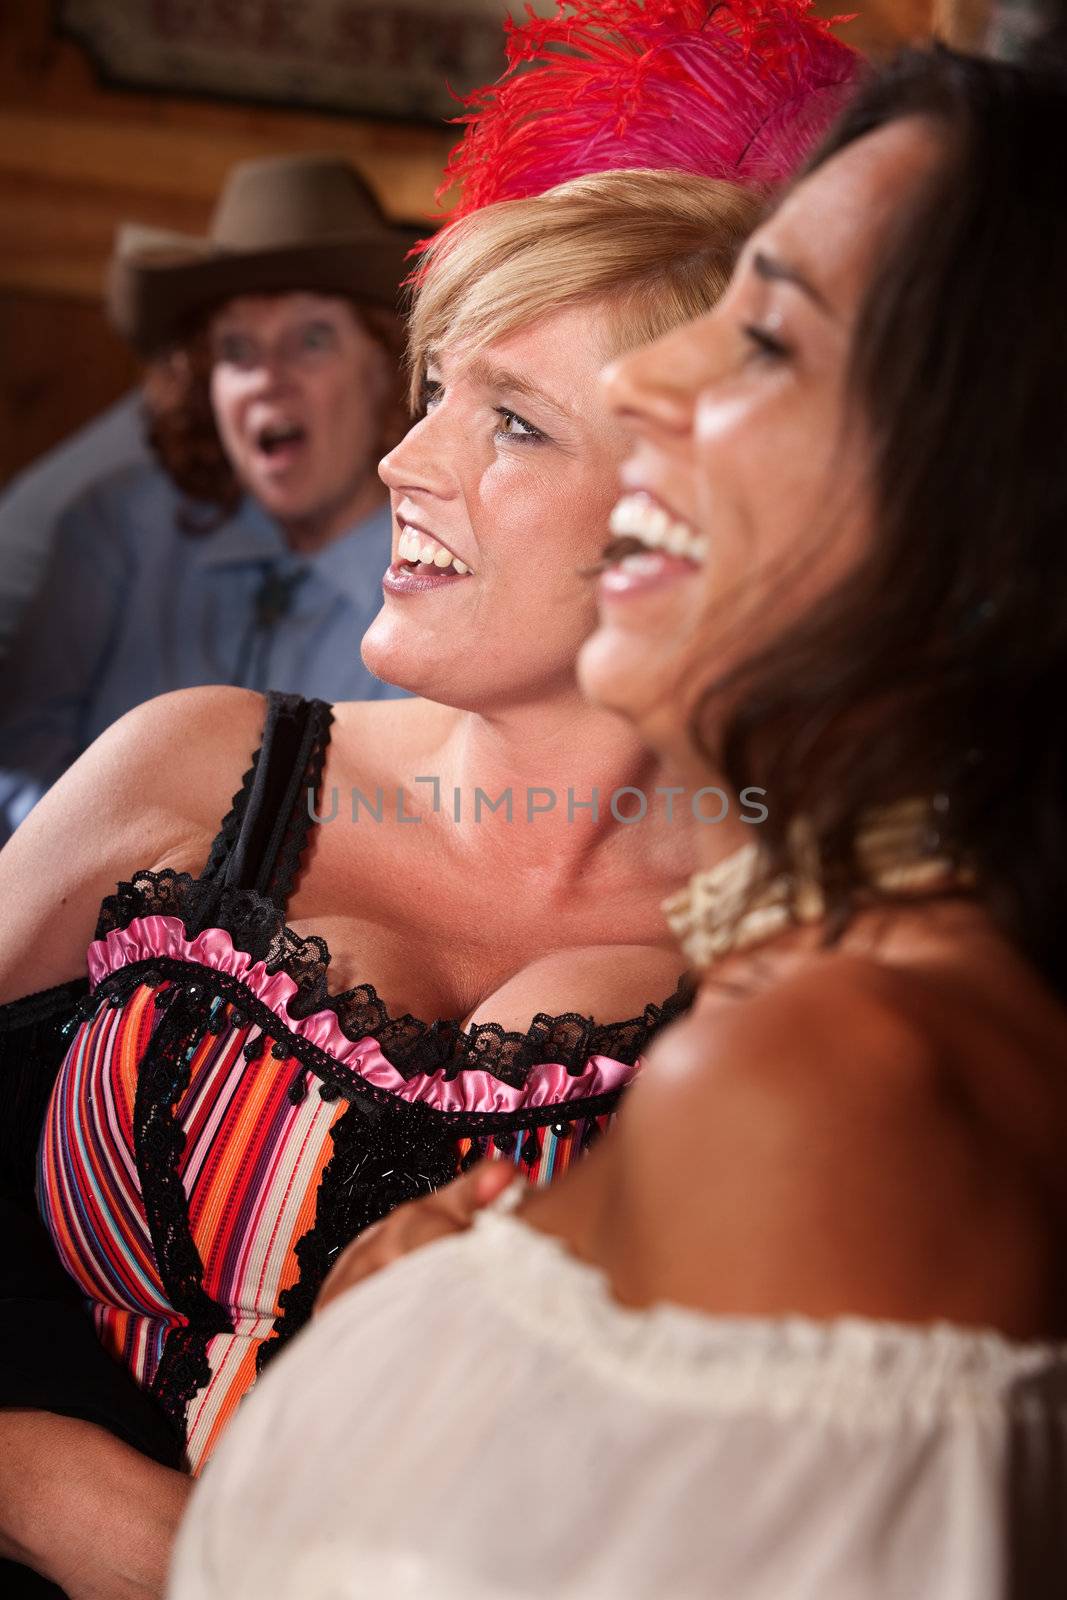 Three happy women laughing in a saloon